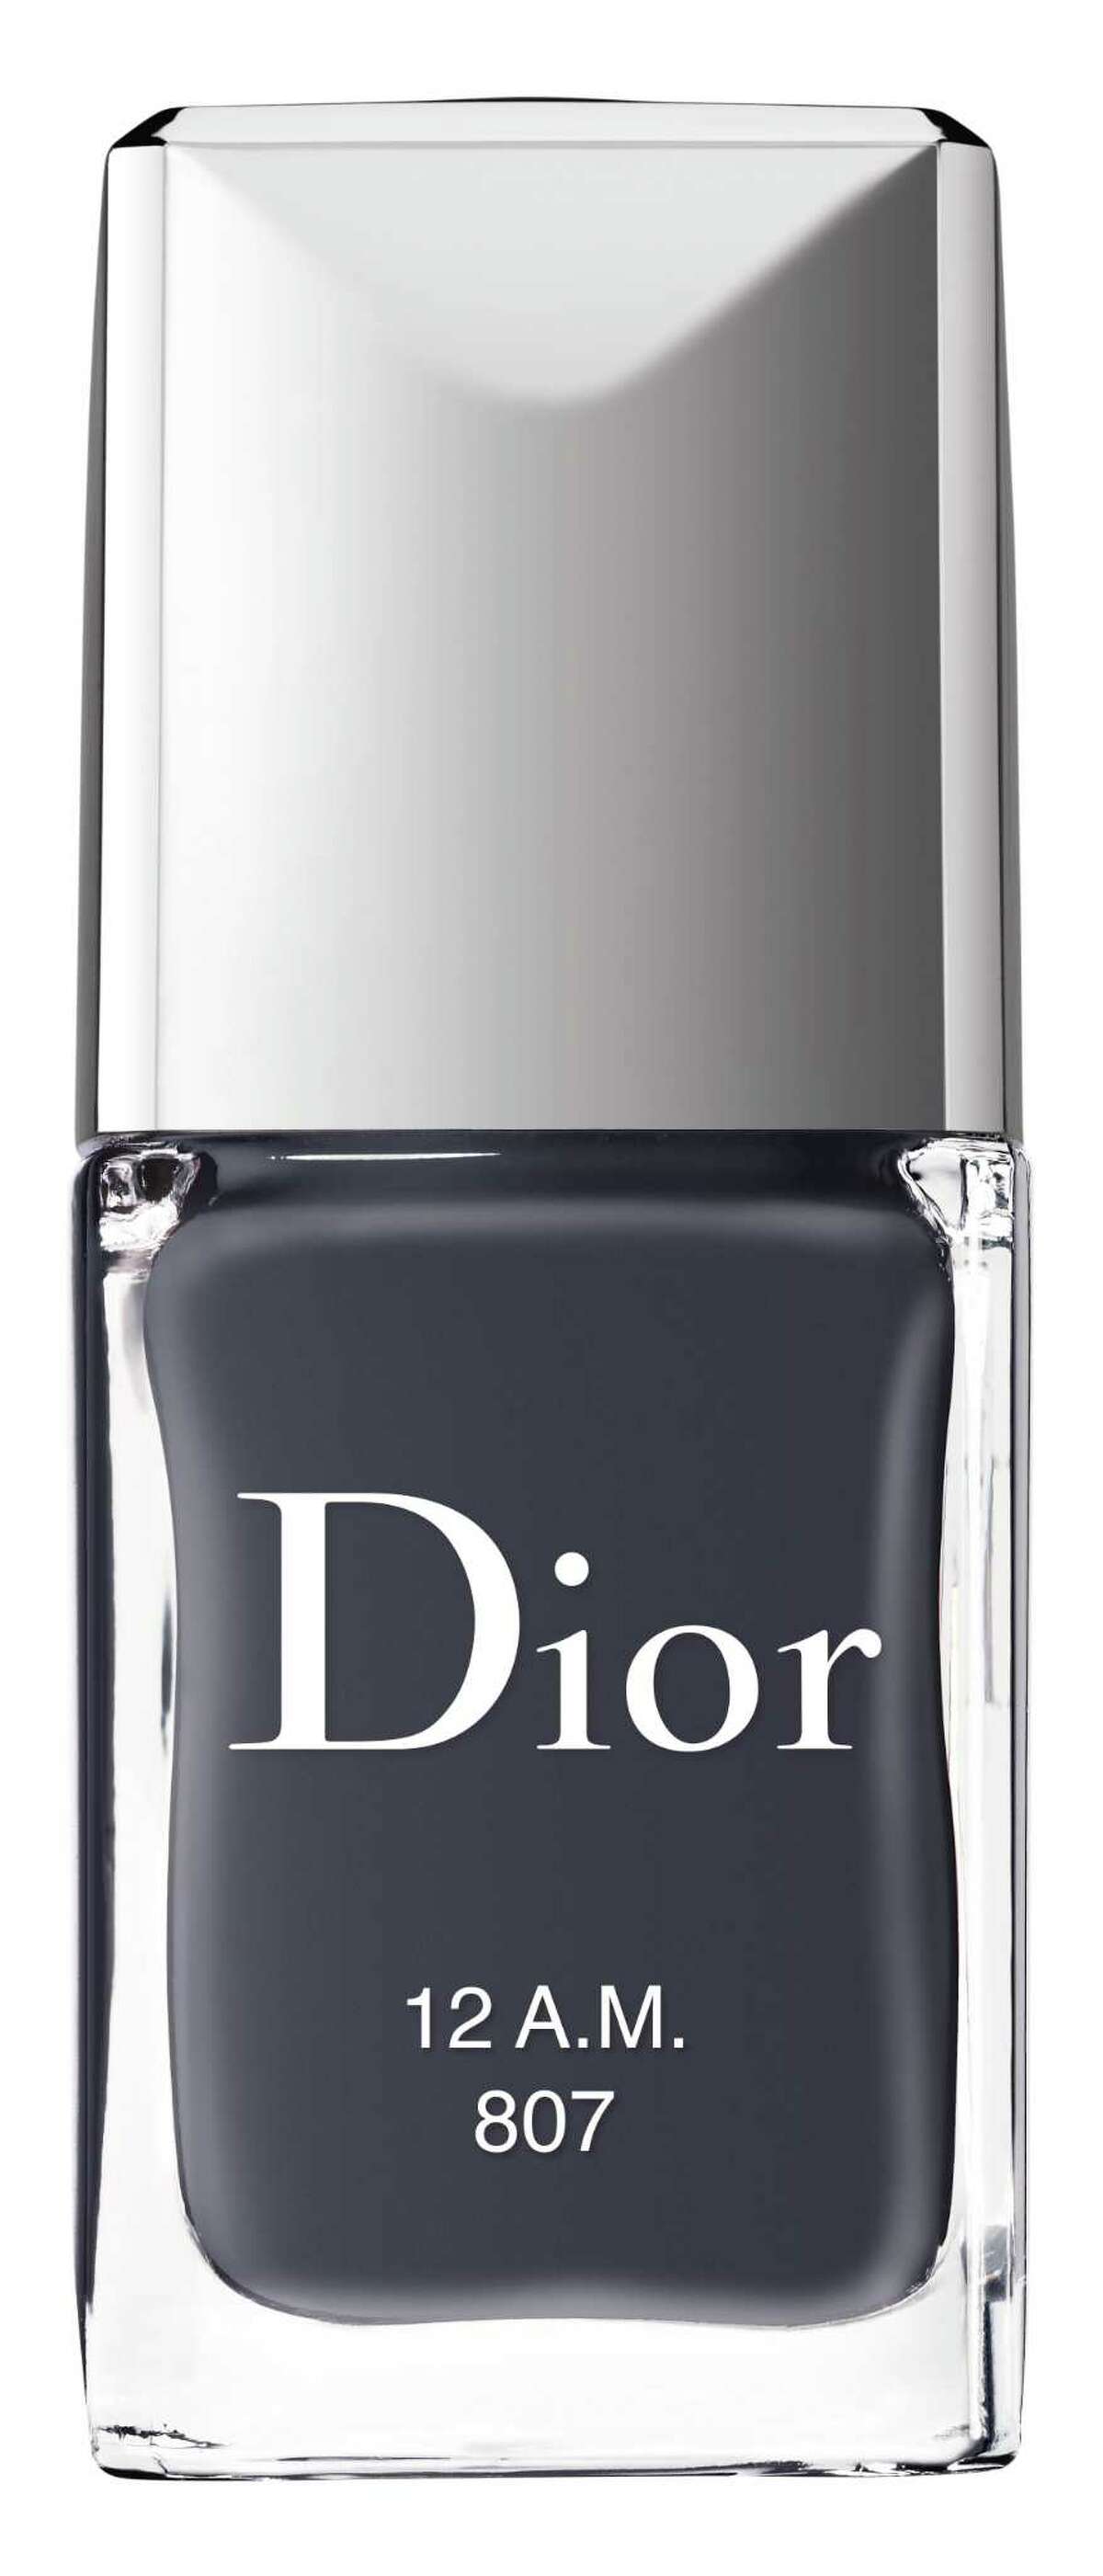 The season's hottest nail colors offer bold statements, dark